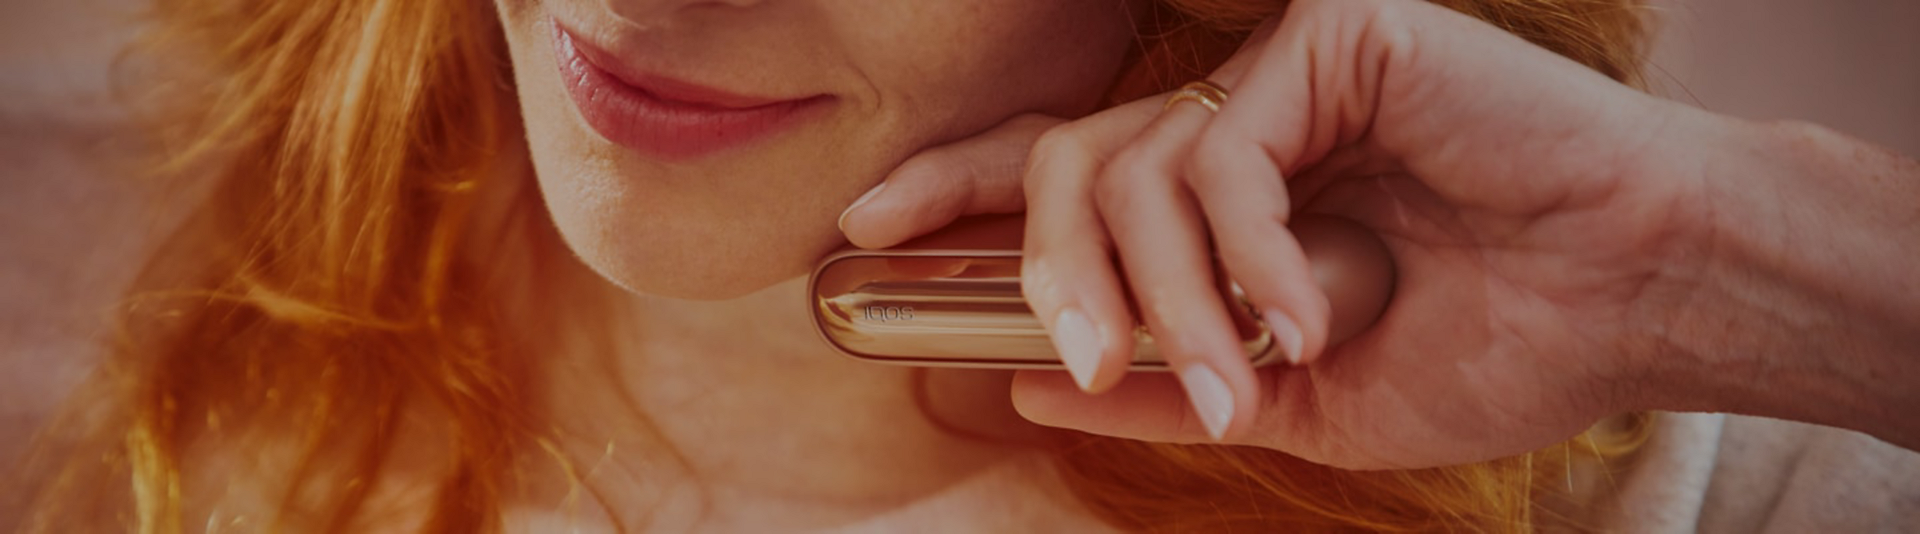 Blond girl with her gold IQOS kit in her hands